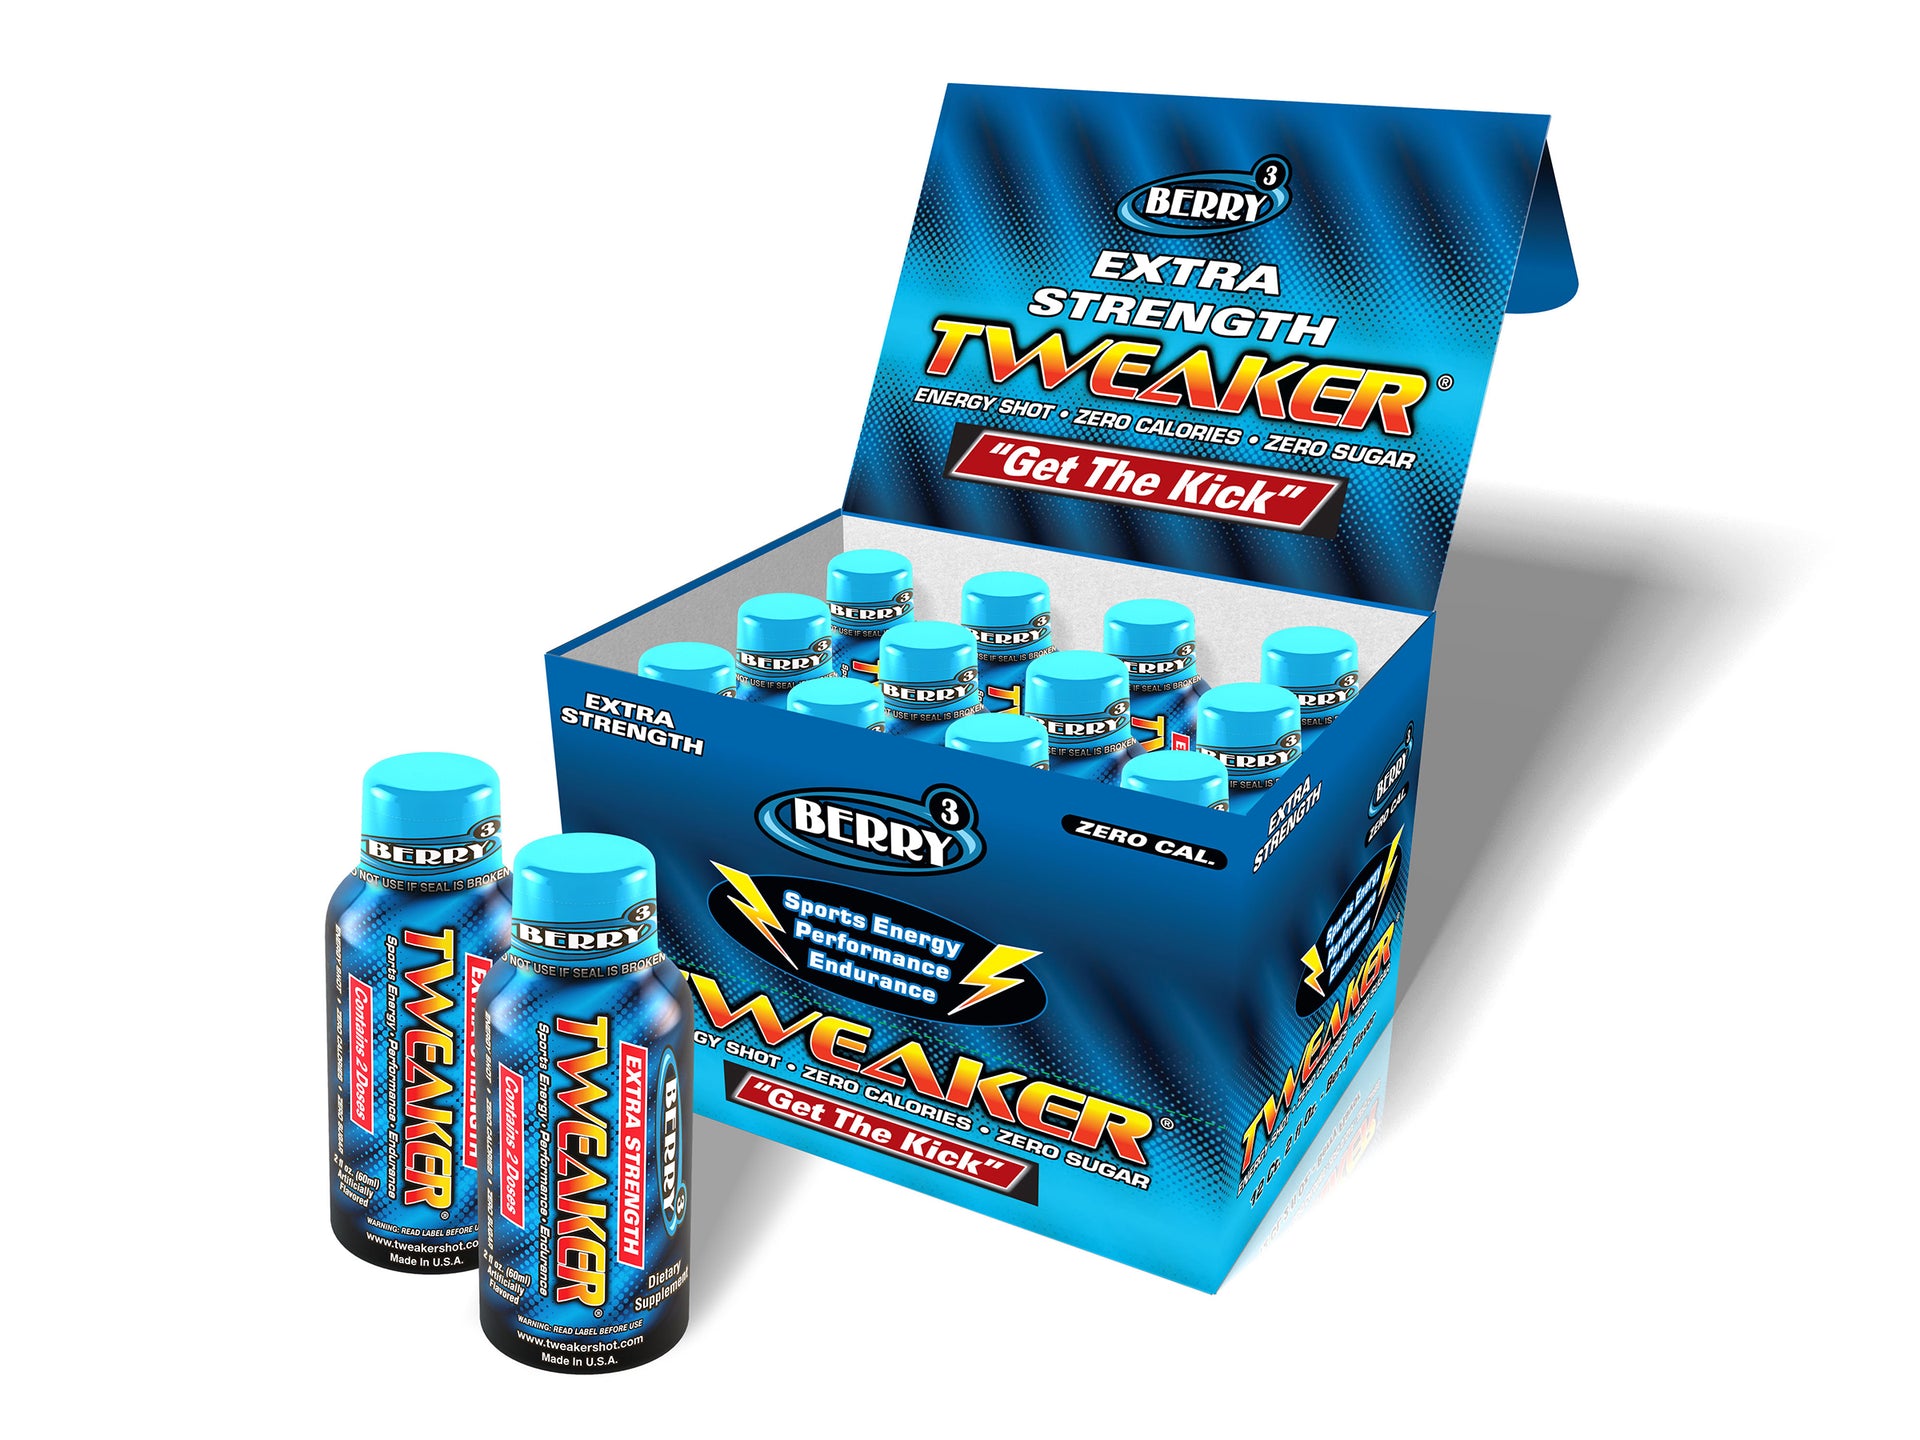 Image shows 12-ct caddy of Extra Strength Tweaker Energy Shot, Berry Flavor